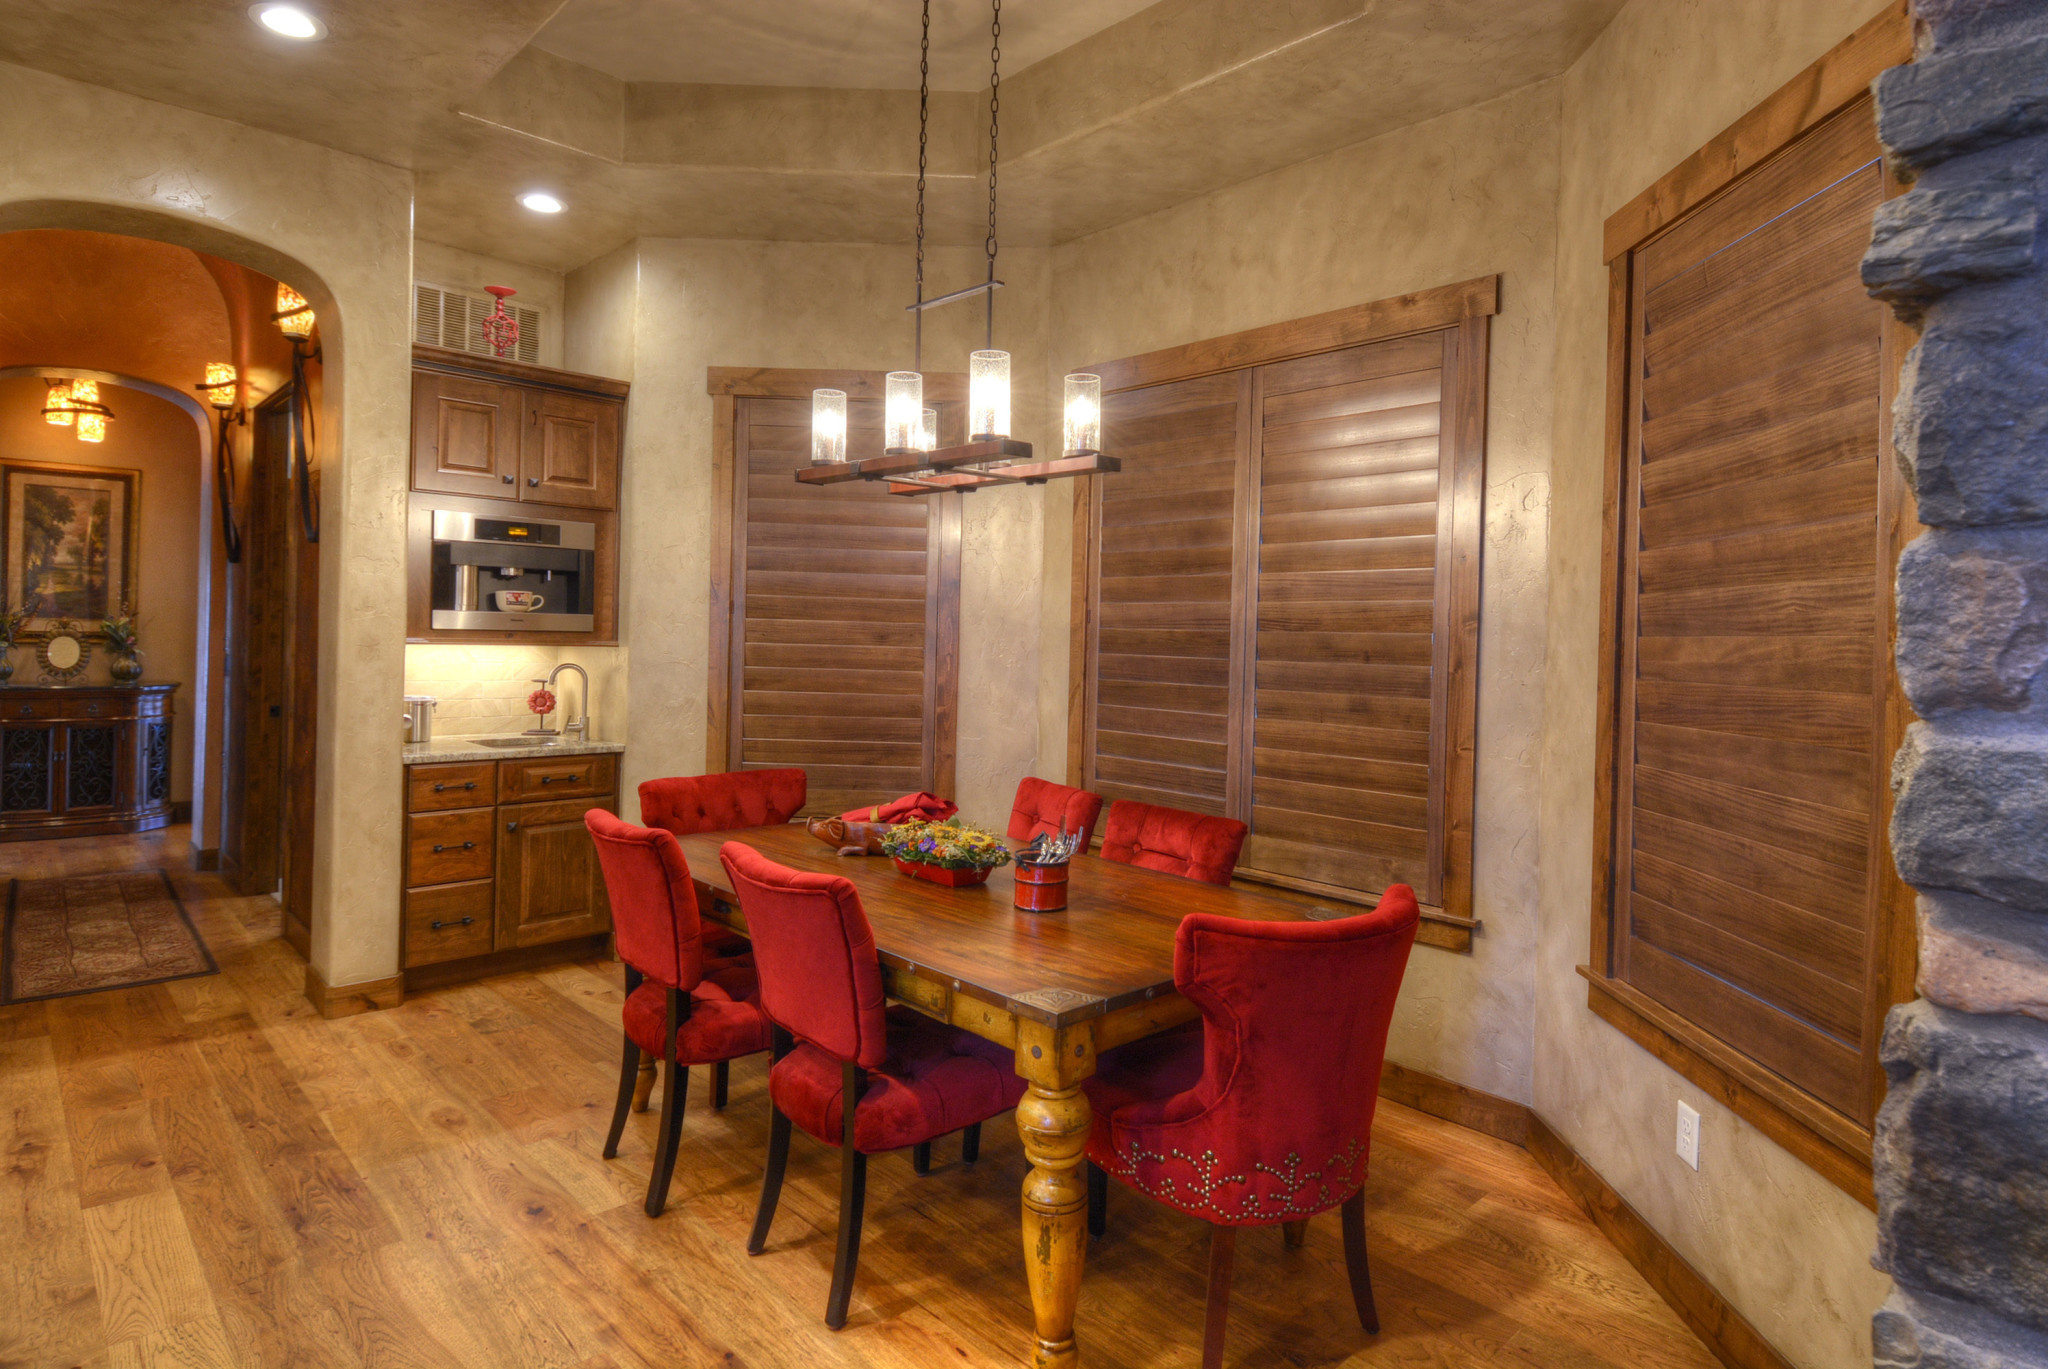 Choosing The Right Lighting For Your Custom Home Dining Areas